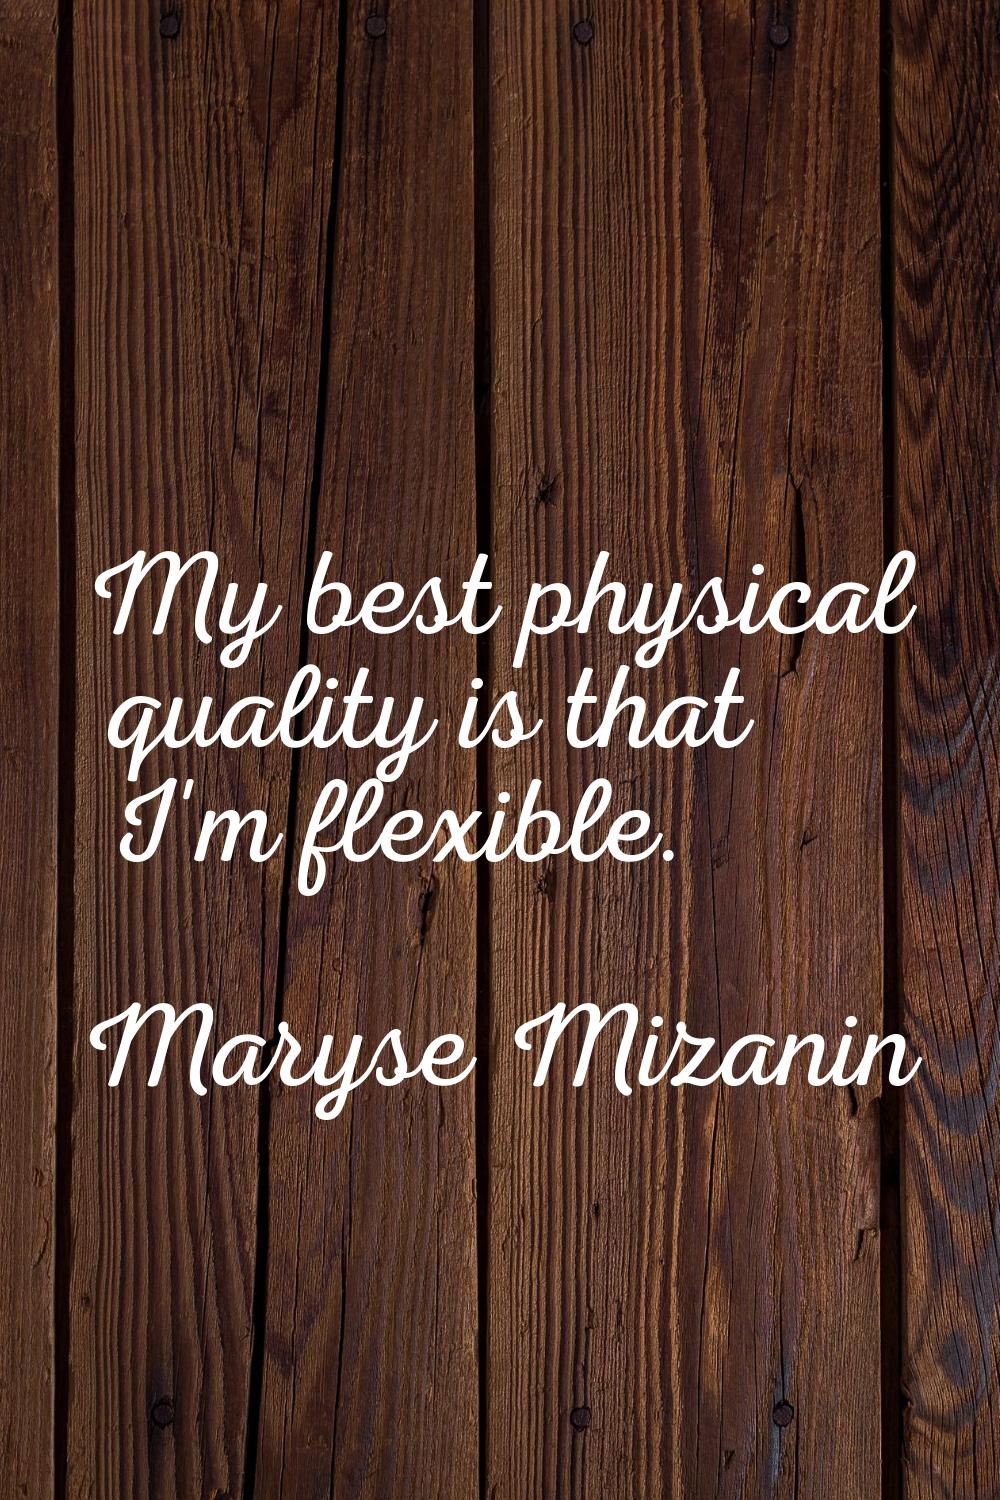 My best physical quality is that I'm flexible.